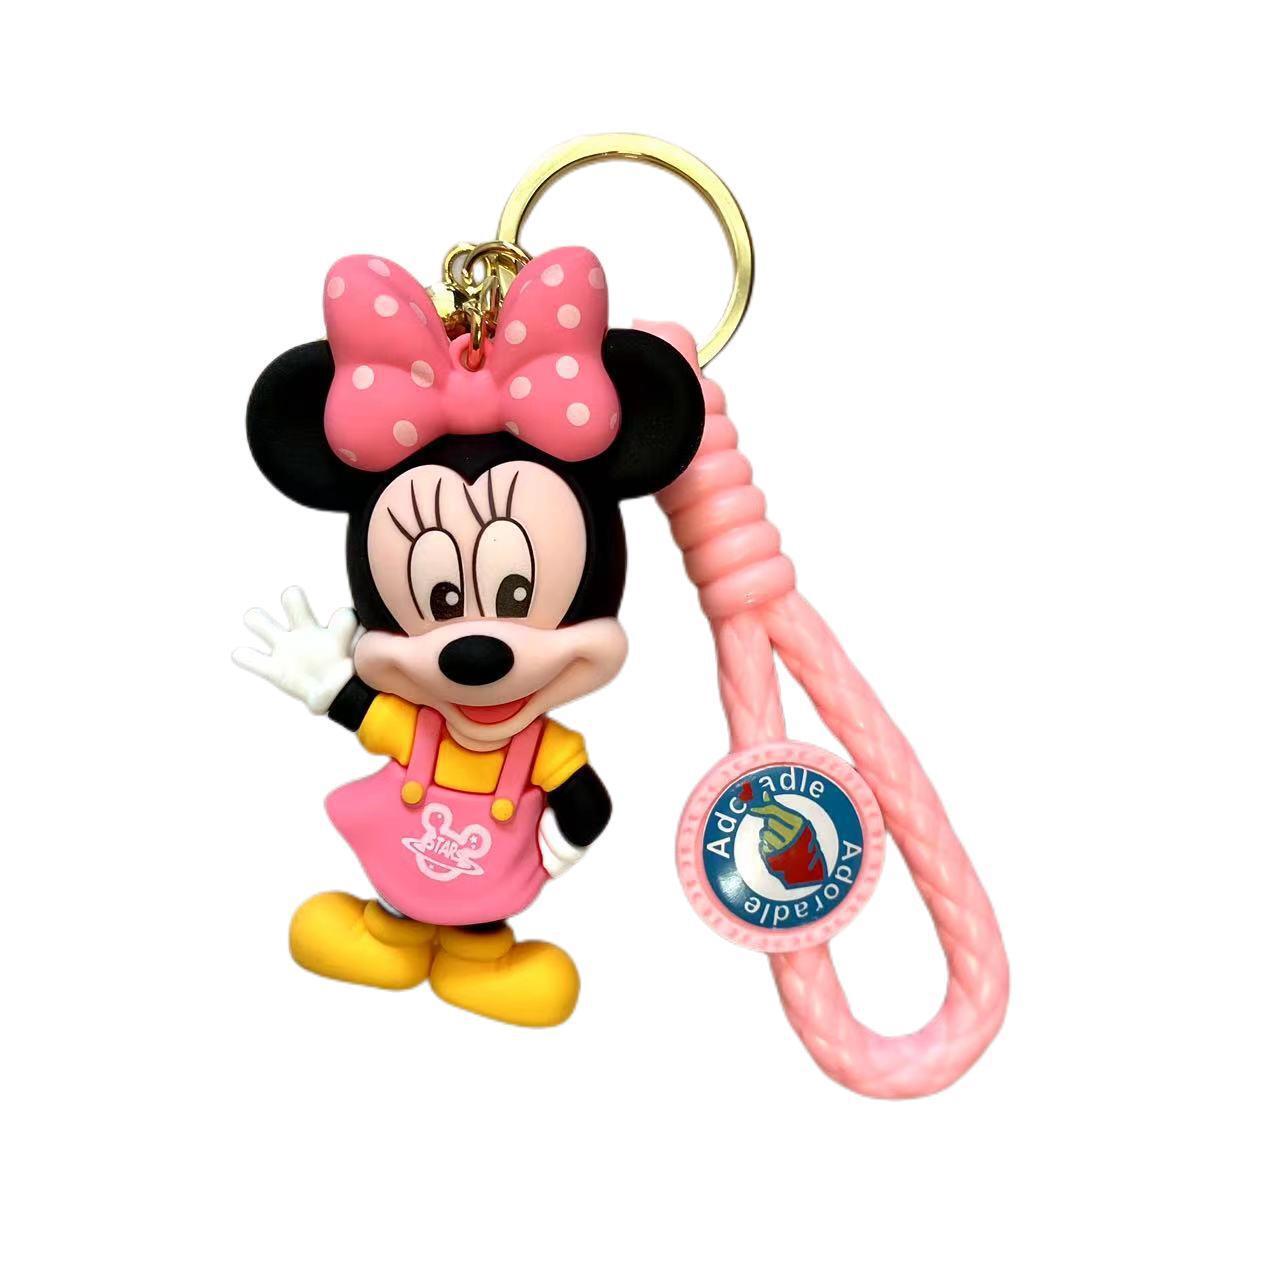 New Mickey Minnie Cartoon Key Button Cute Donald Duck Toy Bag Package Pendant Car Key Chain Small Gift